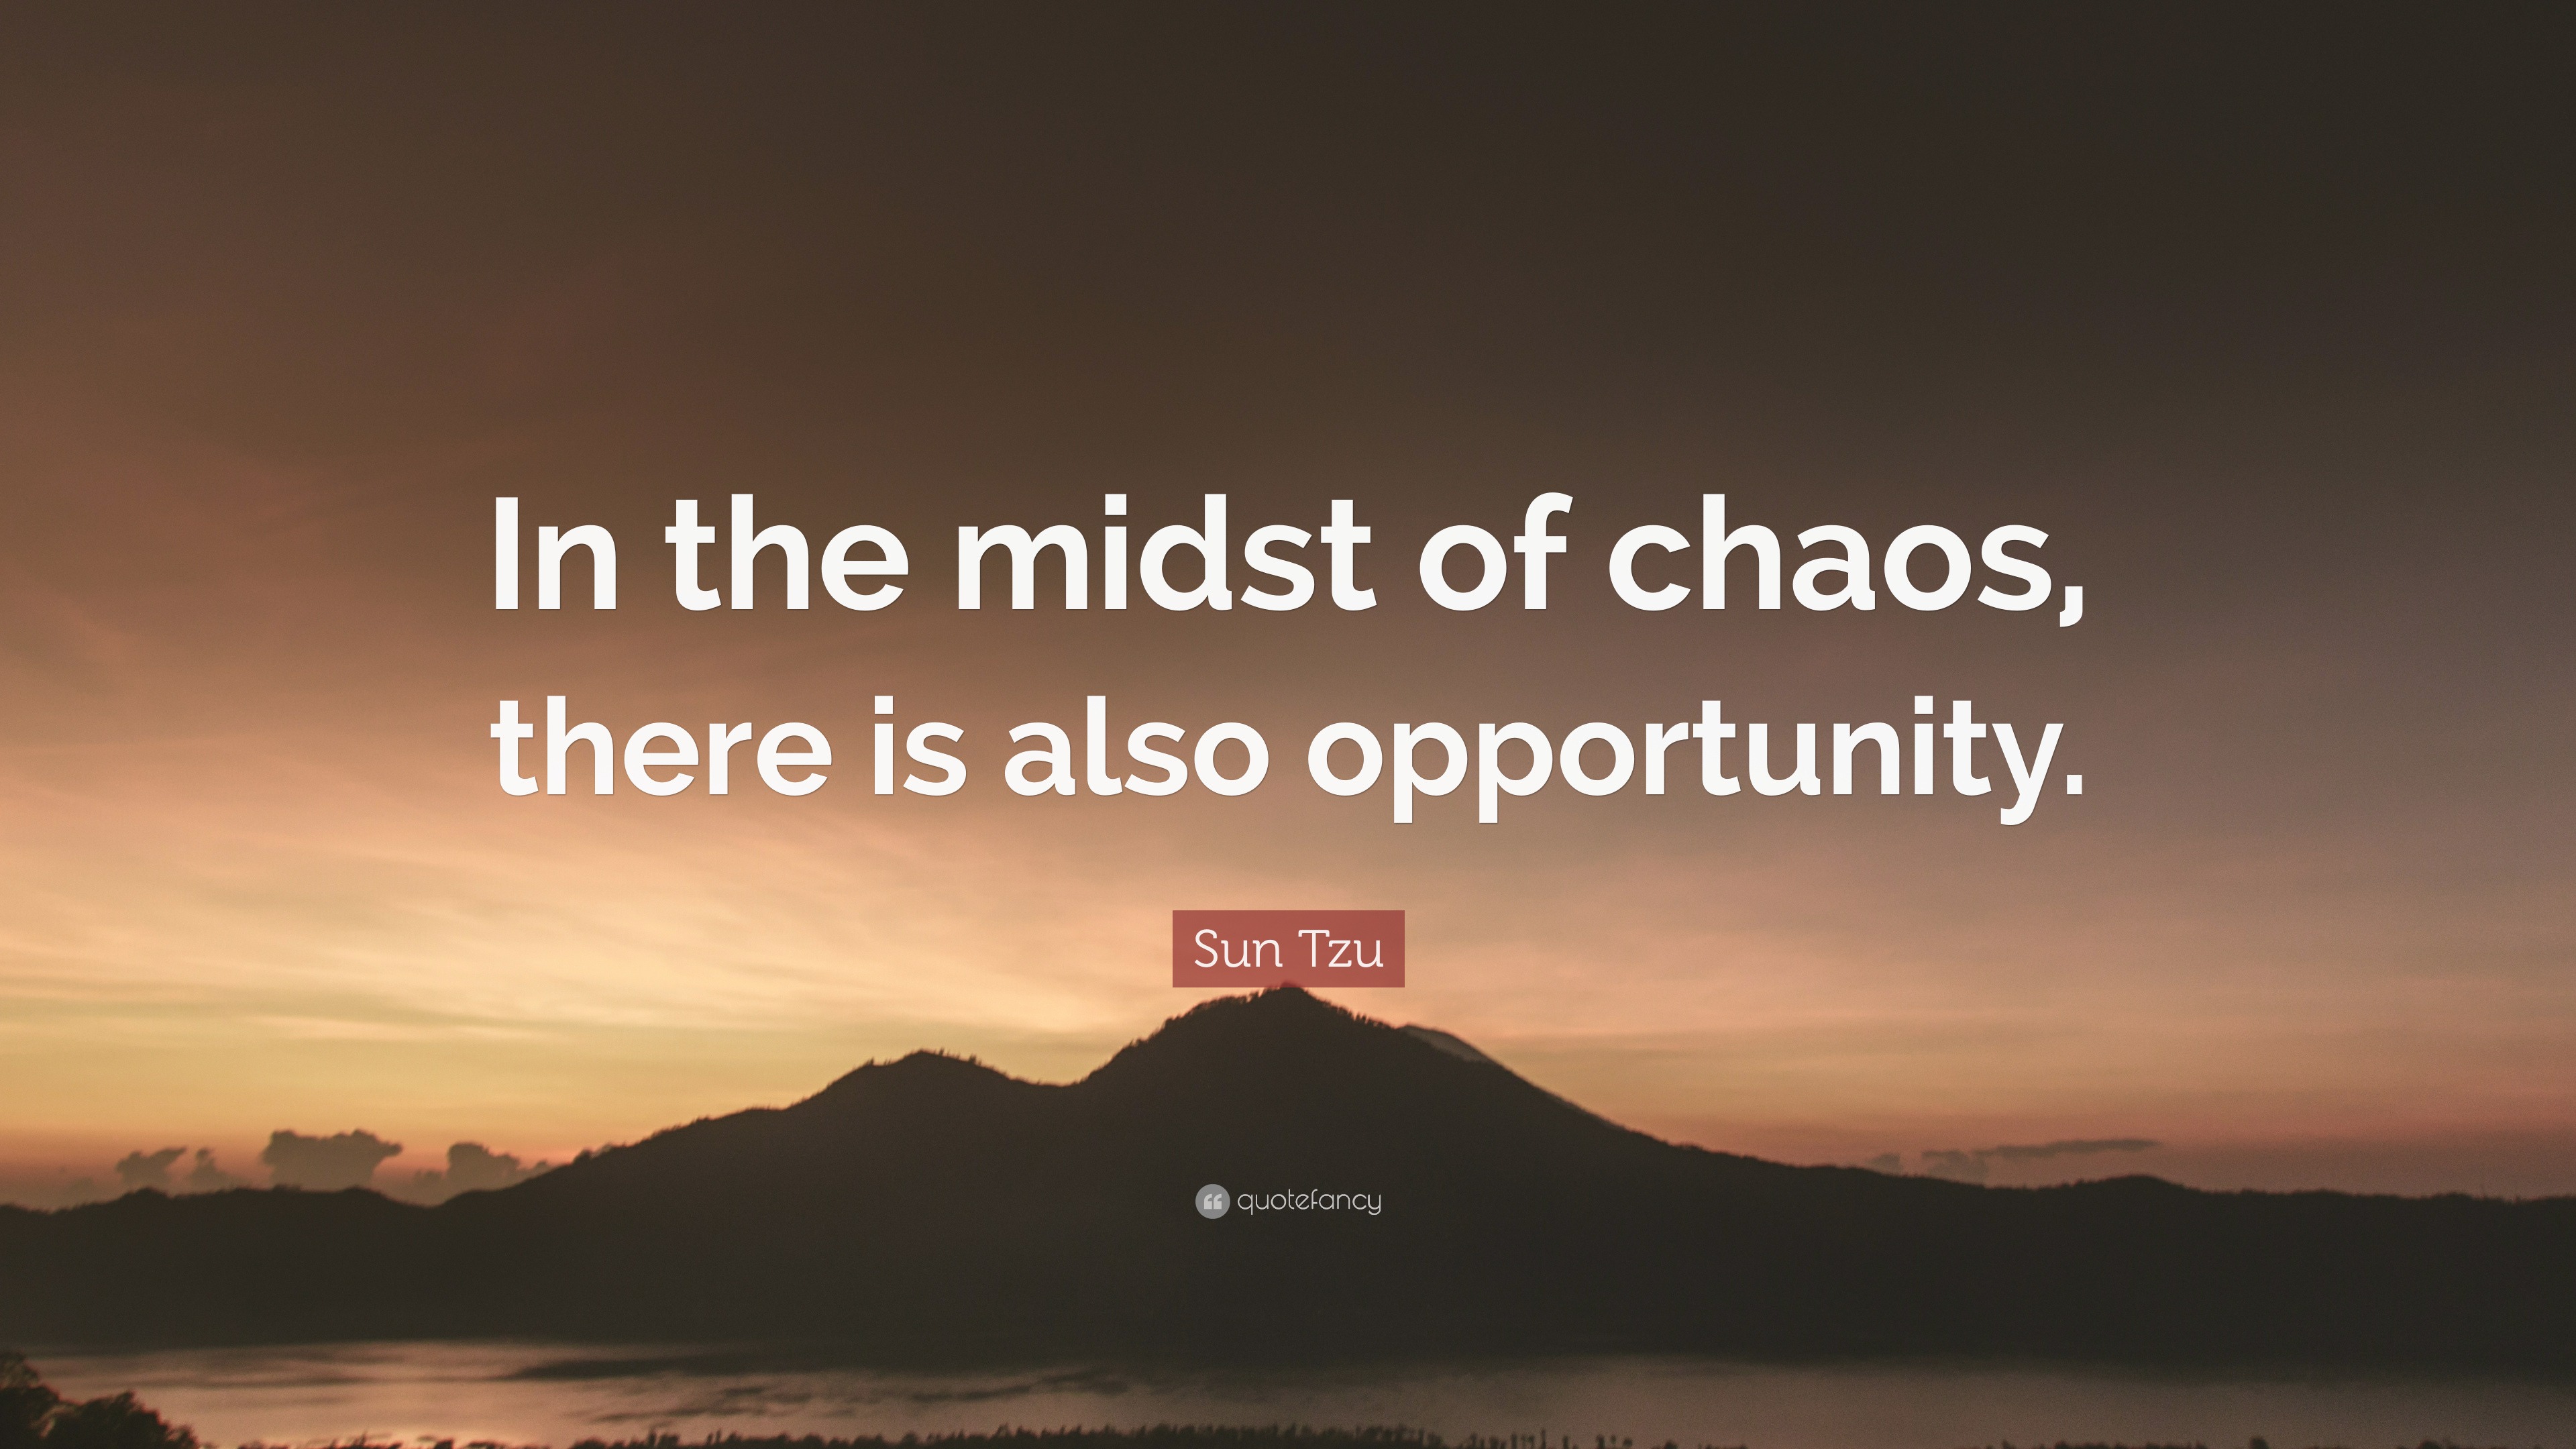 Sun Tzu Quote “In the midst of chaos, there is also opportunity.”